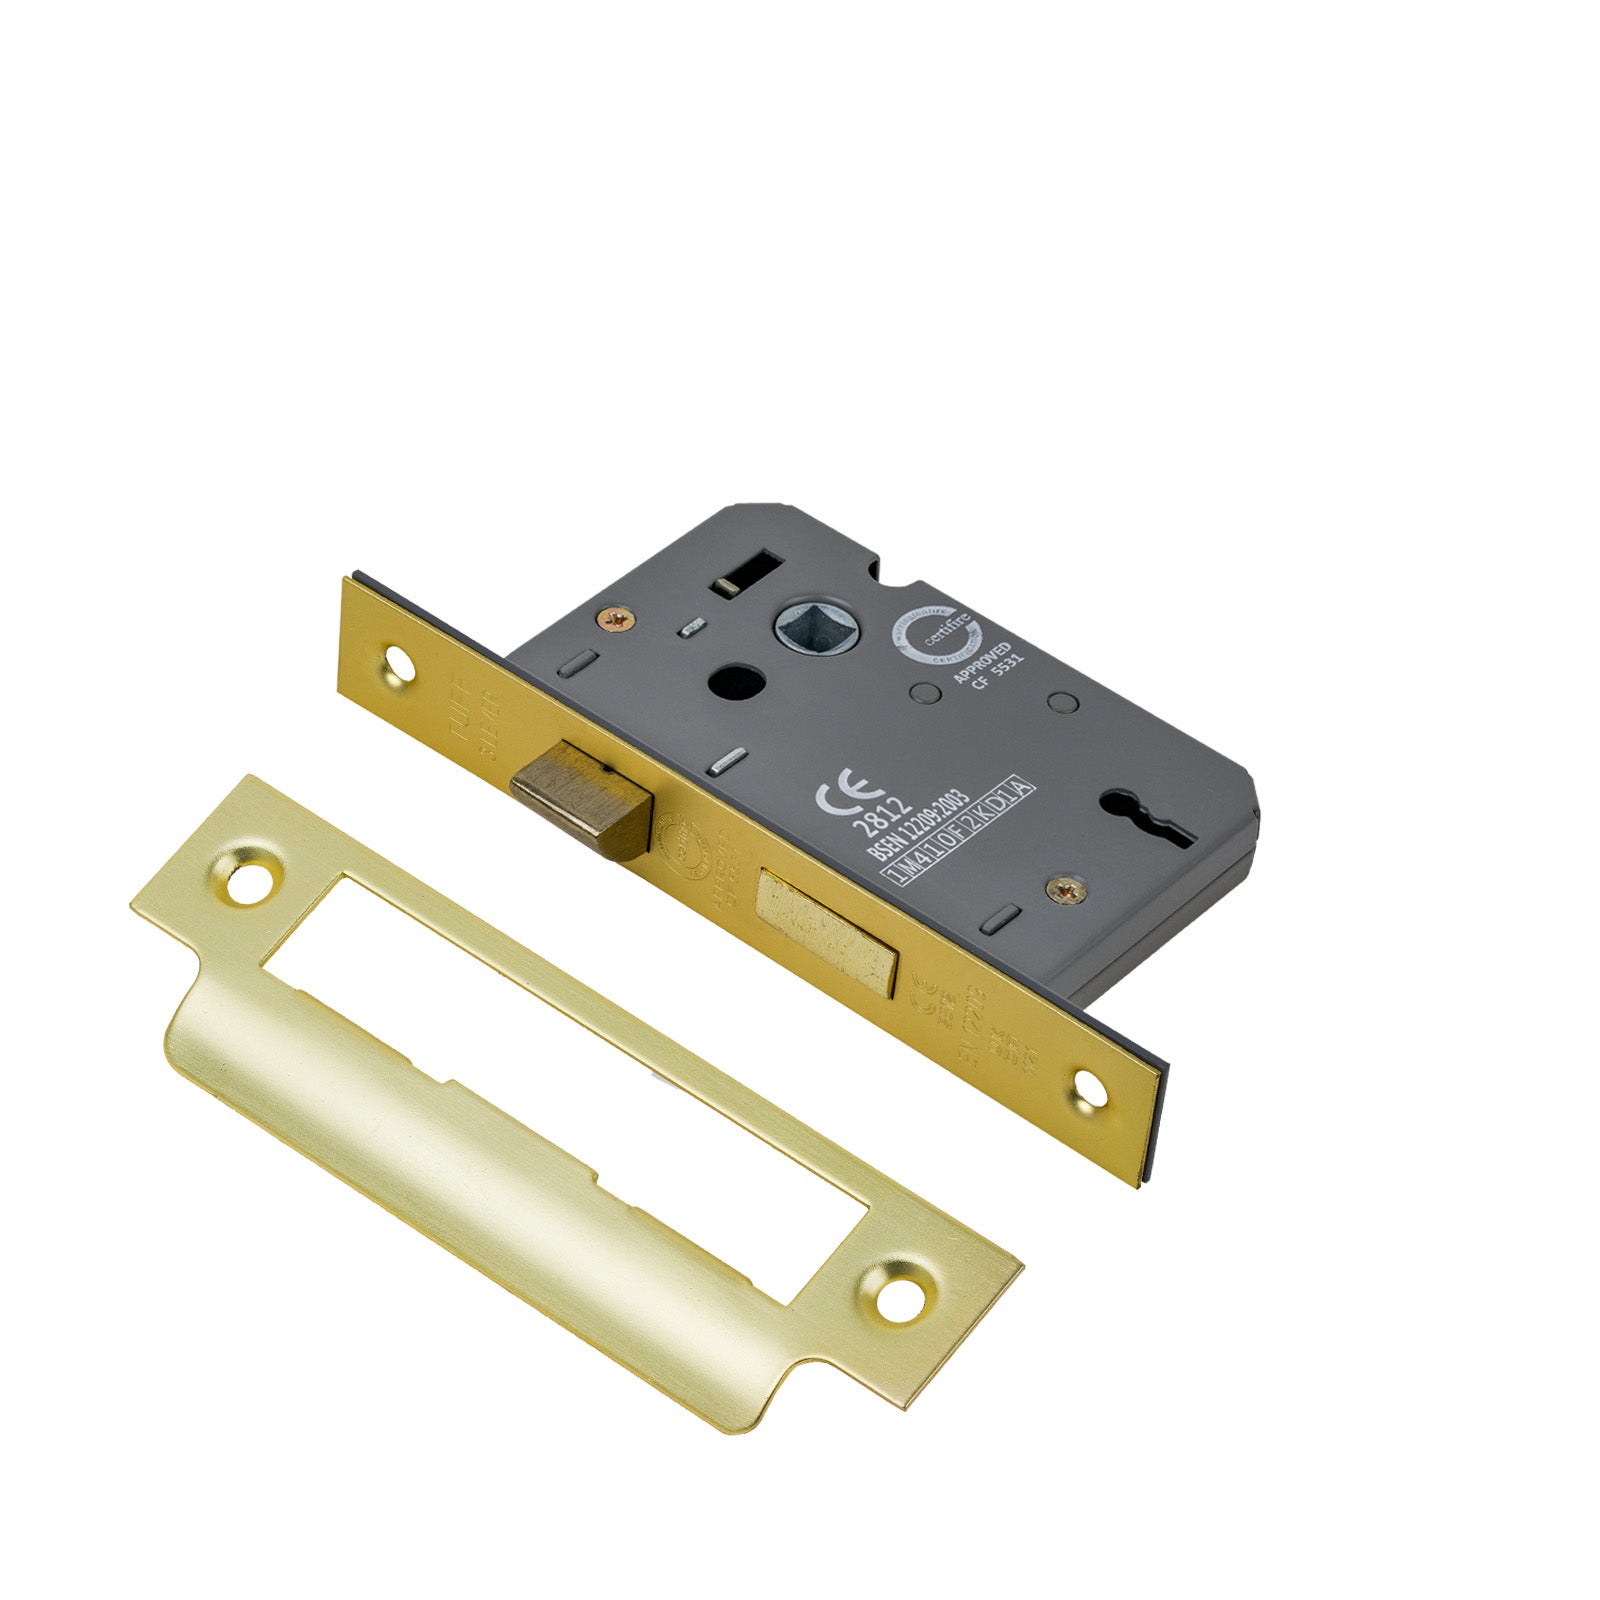 SHOW 3 Lever Sash Lock - 2.5 Inch with Satin Brass finished forend and striker plate